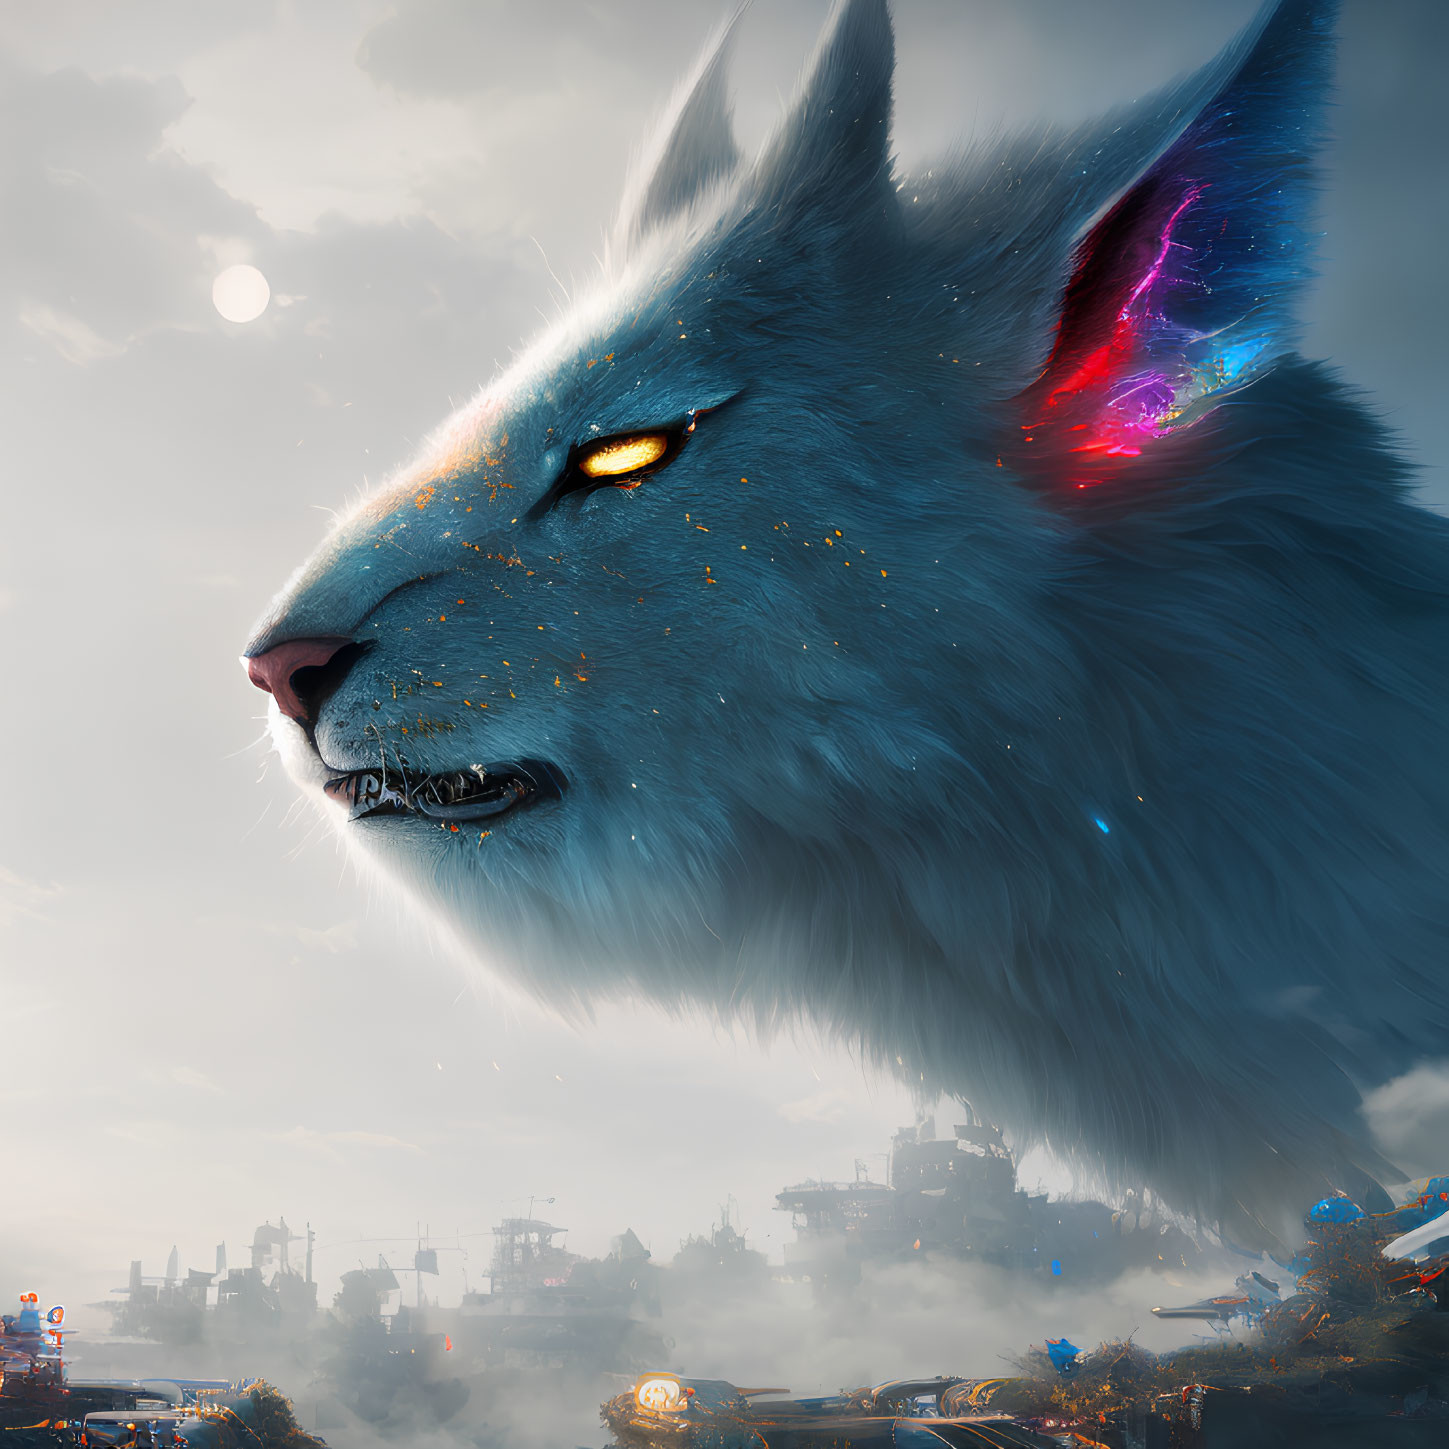 Blue wolf with golden flecks and multicolored ears in misty industrial landscape